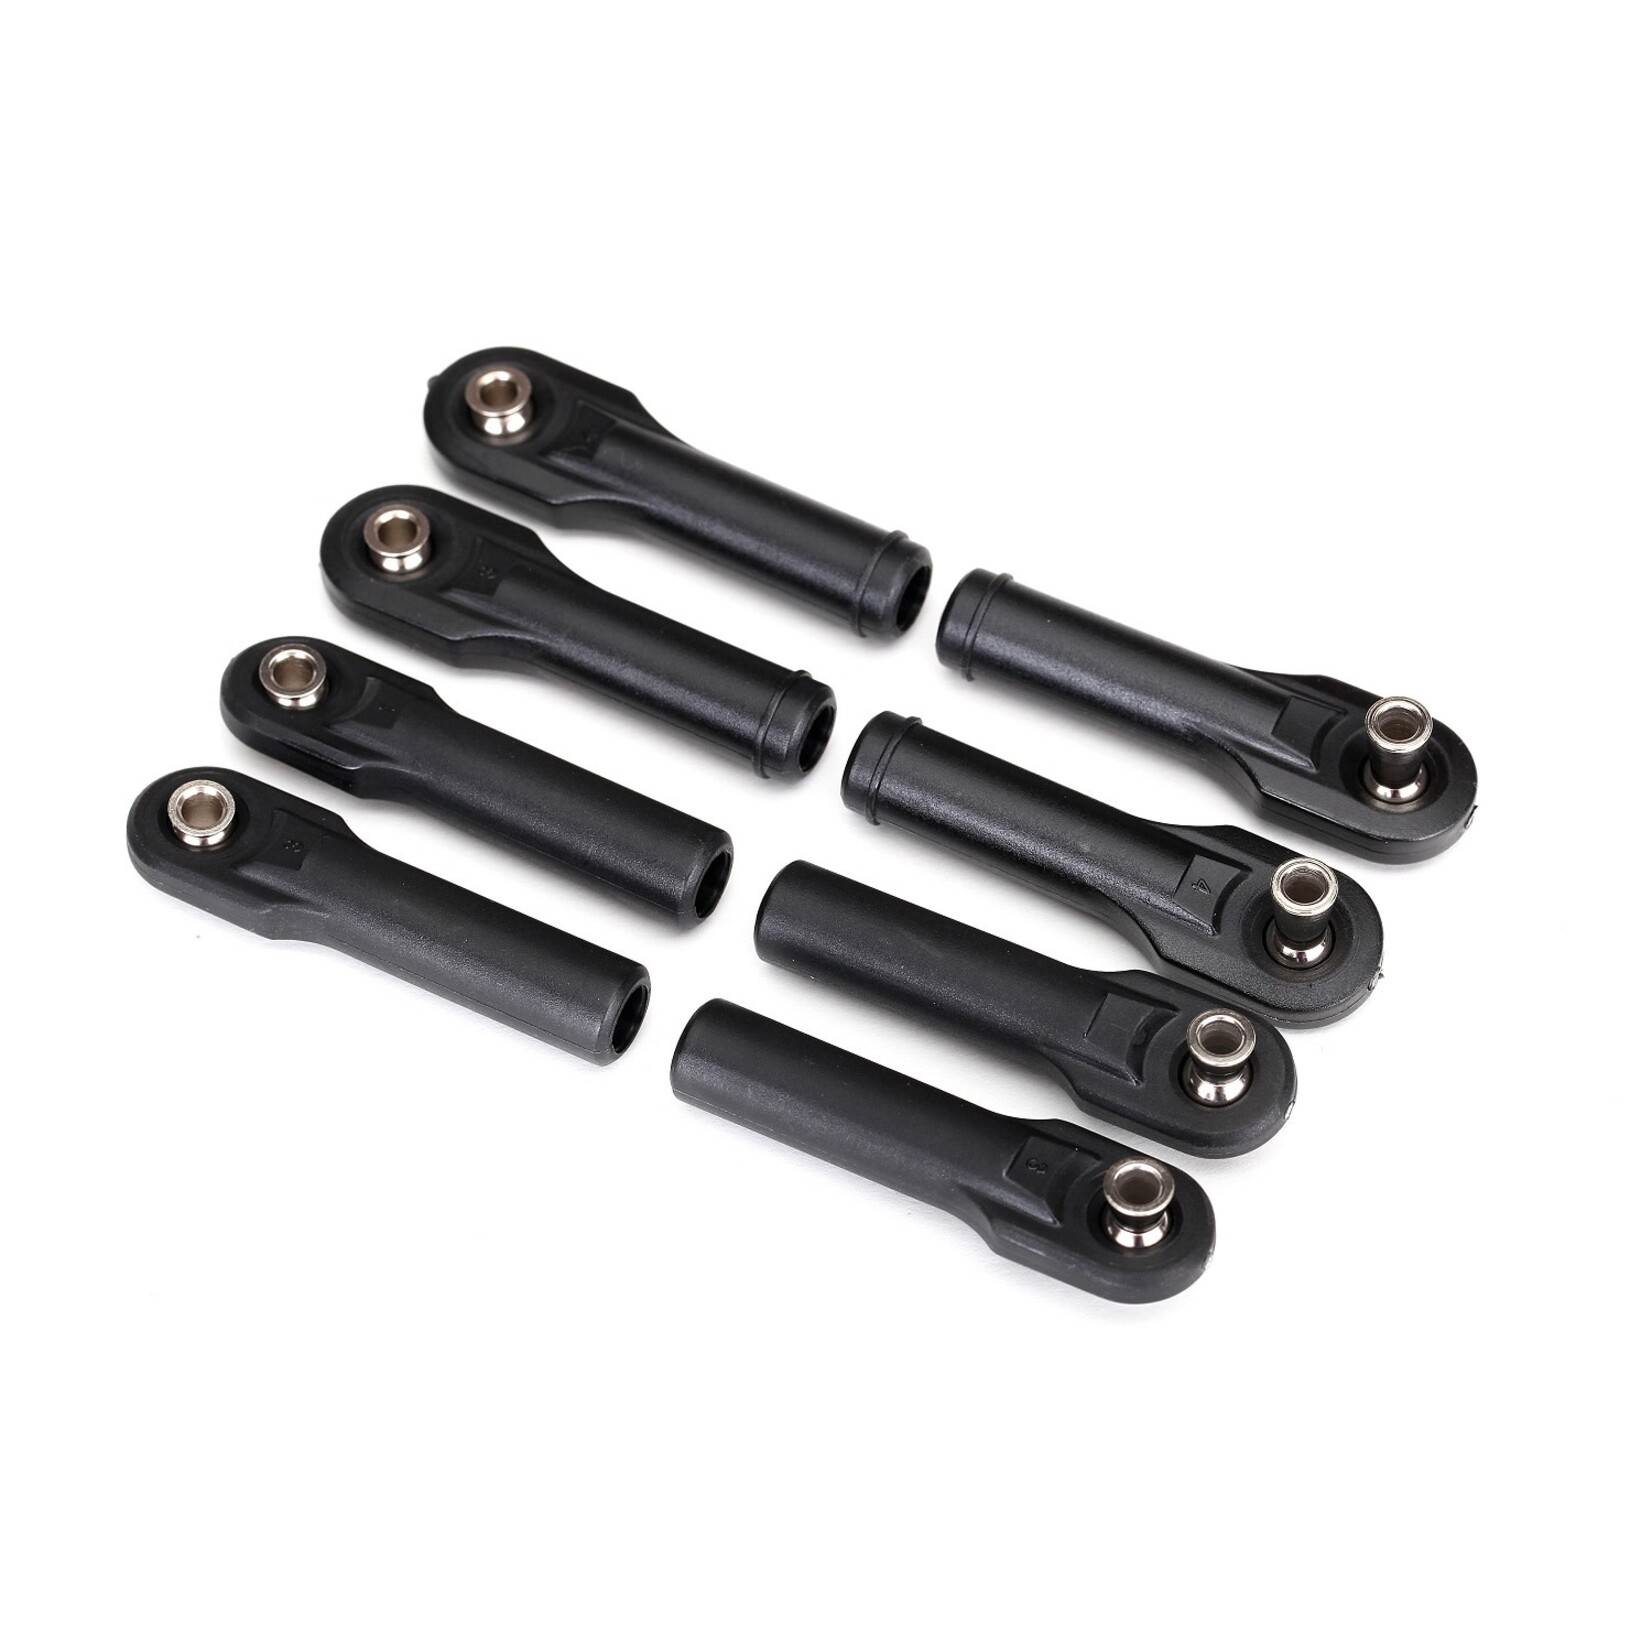 TRAXXAS Rod ends, heavy duty (toe links) (8) (assembled with hollow balls)